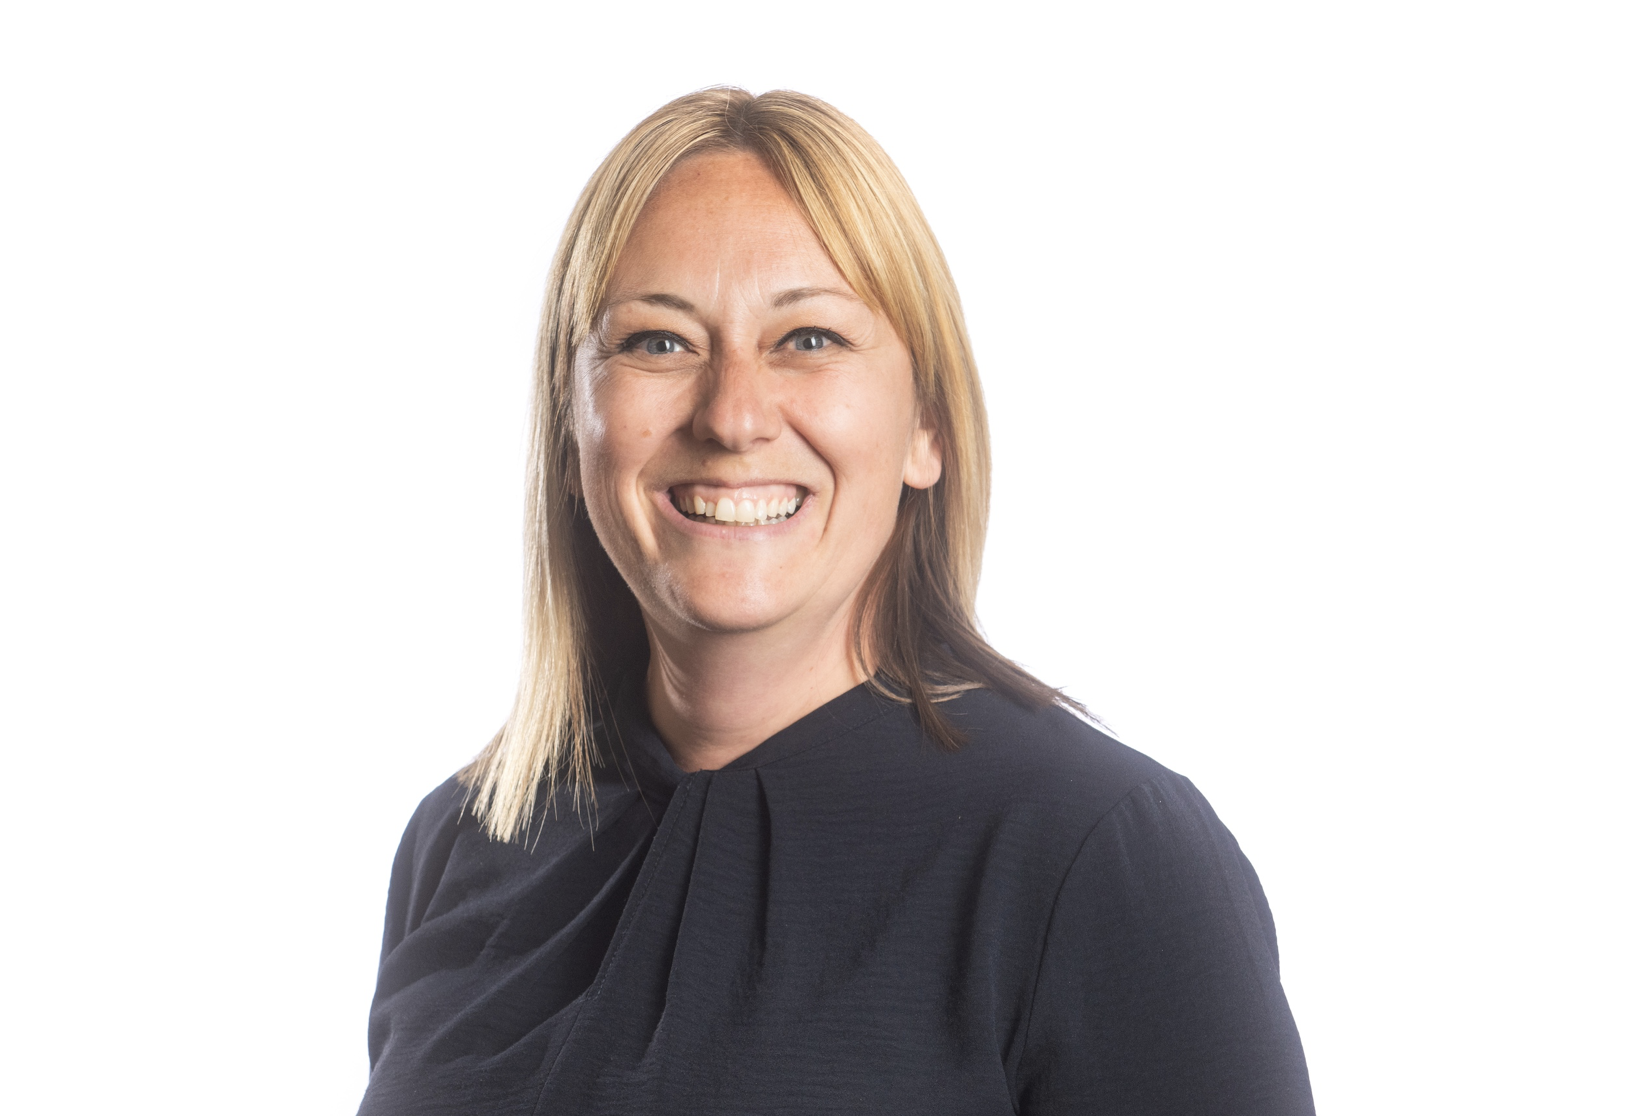 Commercial director shortlisted in Forward Ladies Leadership Summit & Awards